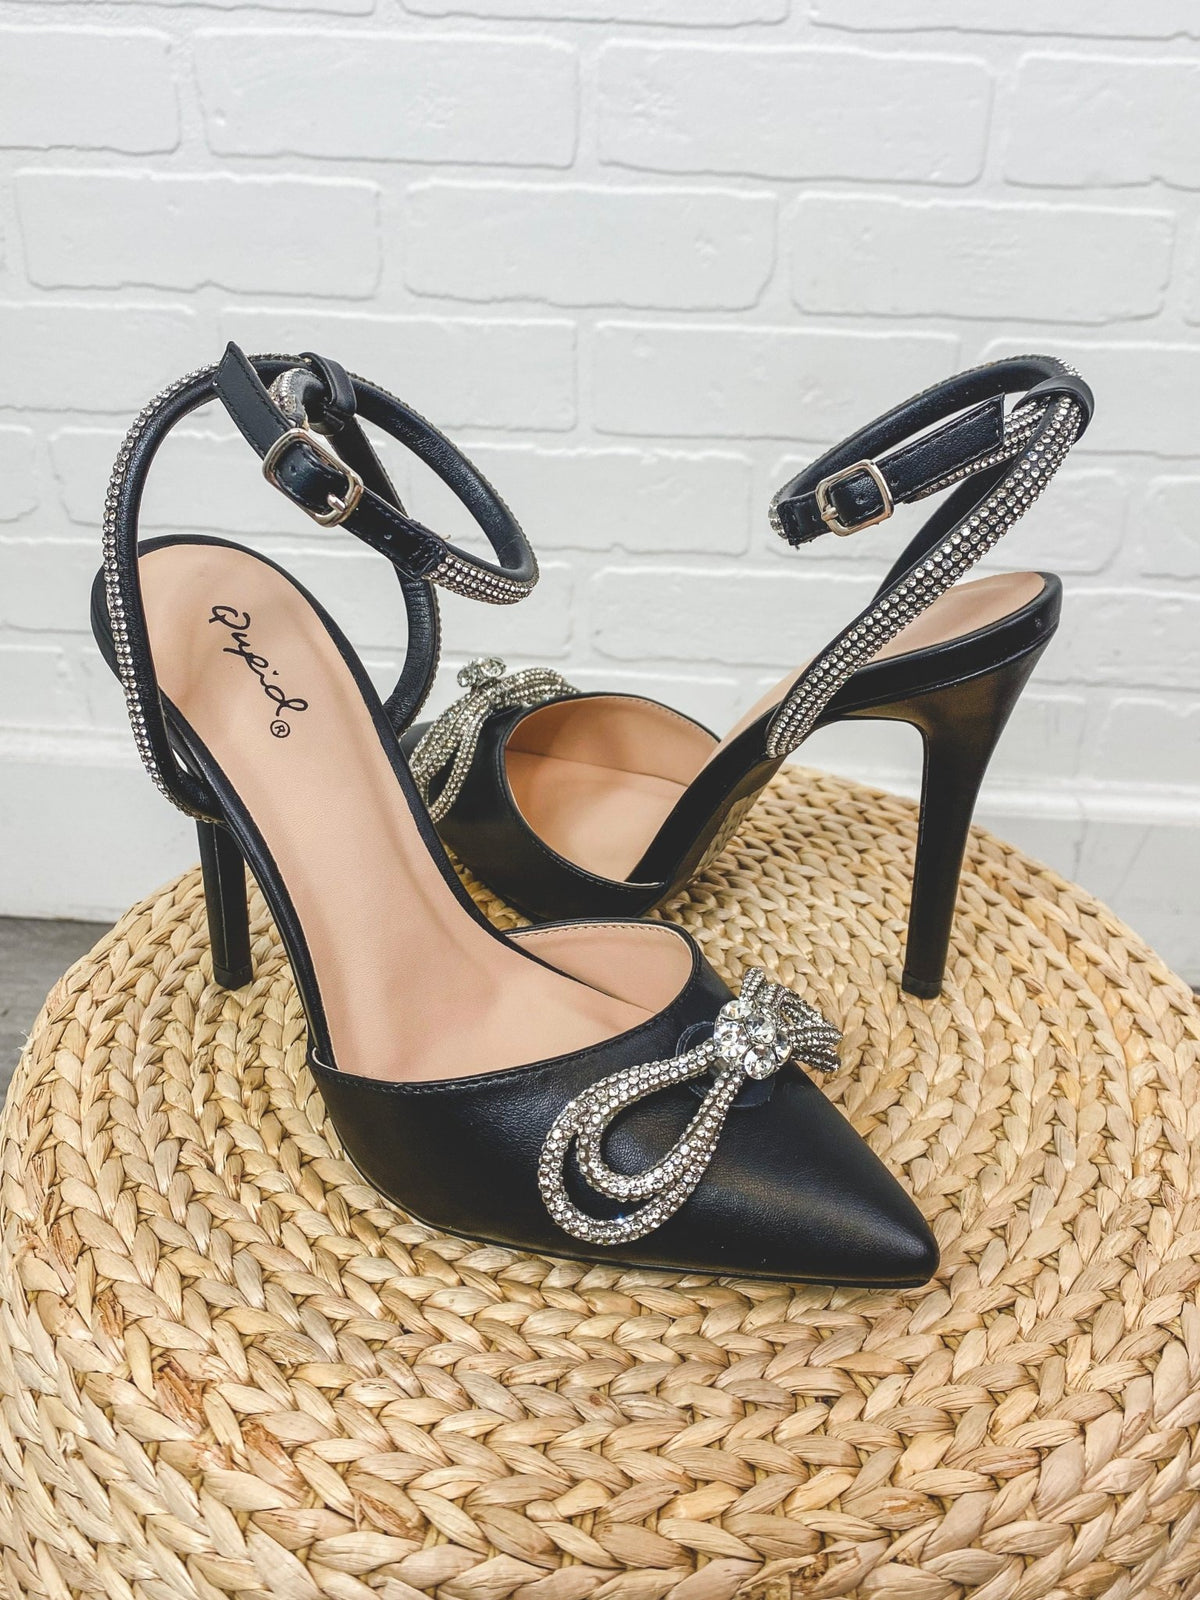 Show rhinestone ankle strap heel black - Trendy New Year's Eve Outfits at Lush Fashion Lounge Boutique in Oklahoma City